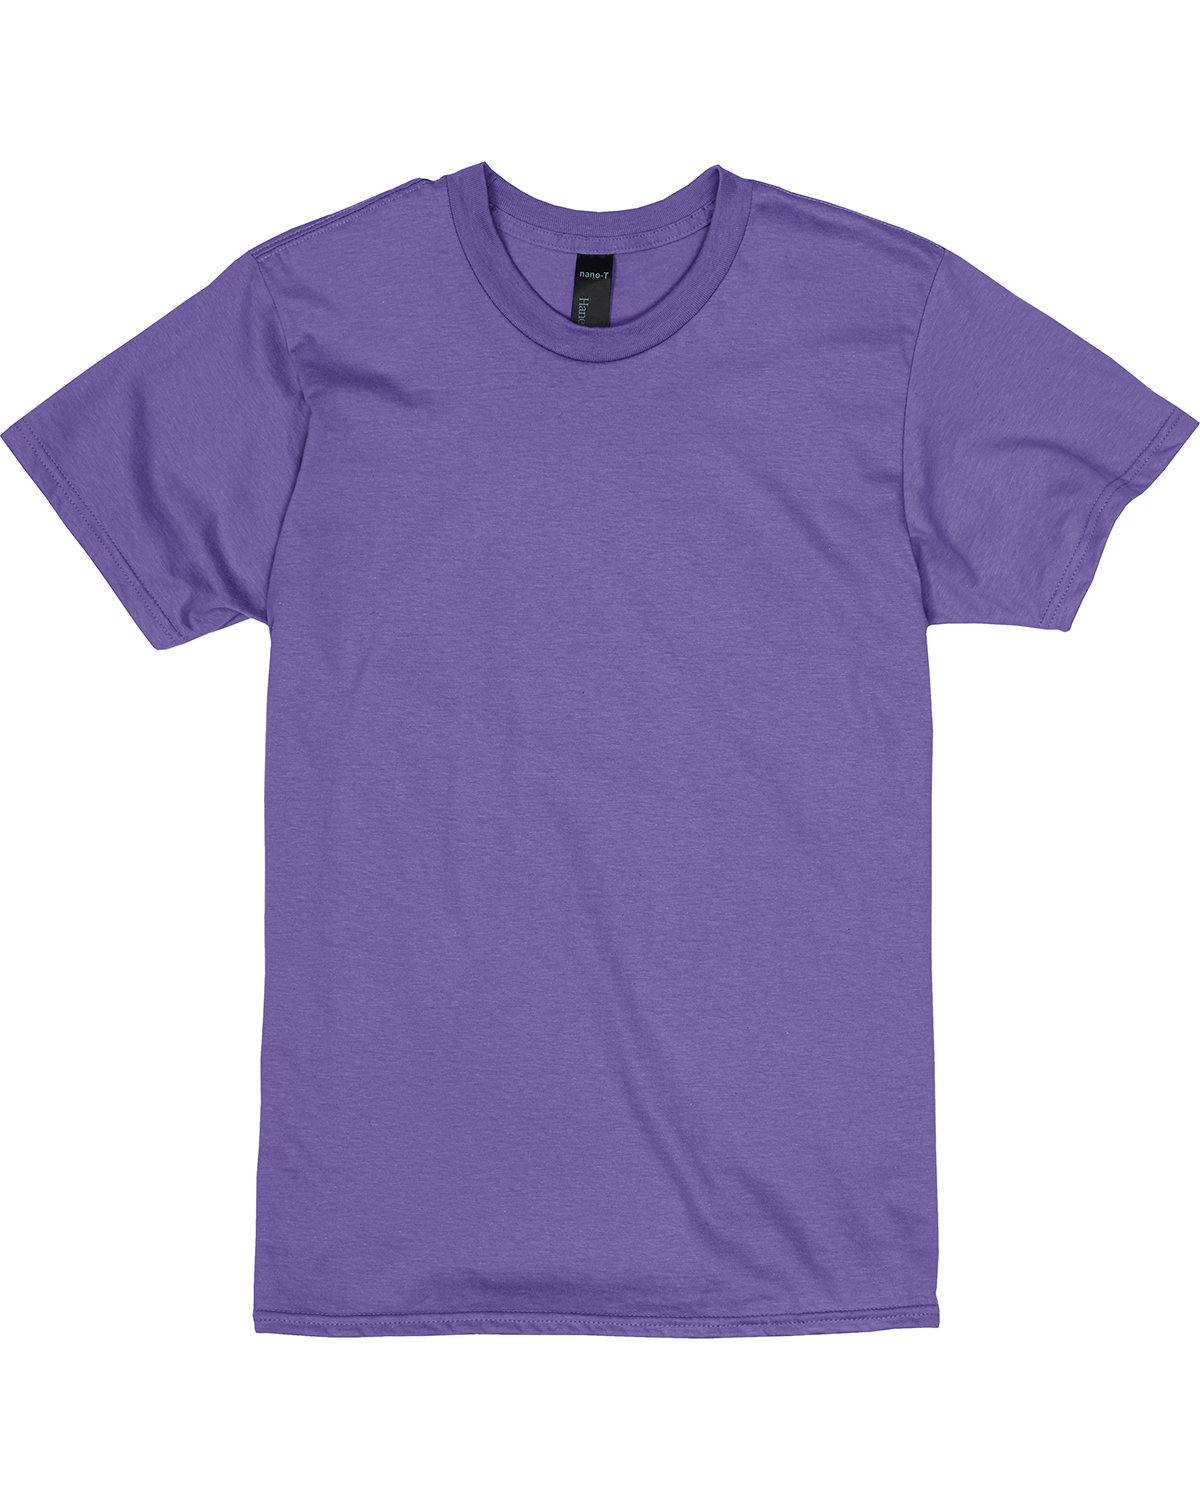 Men’s No Boundaries T-Shirt 100% Cotton. Size XS Purple brand new with tag￼￼